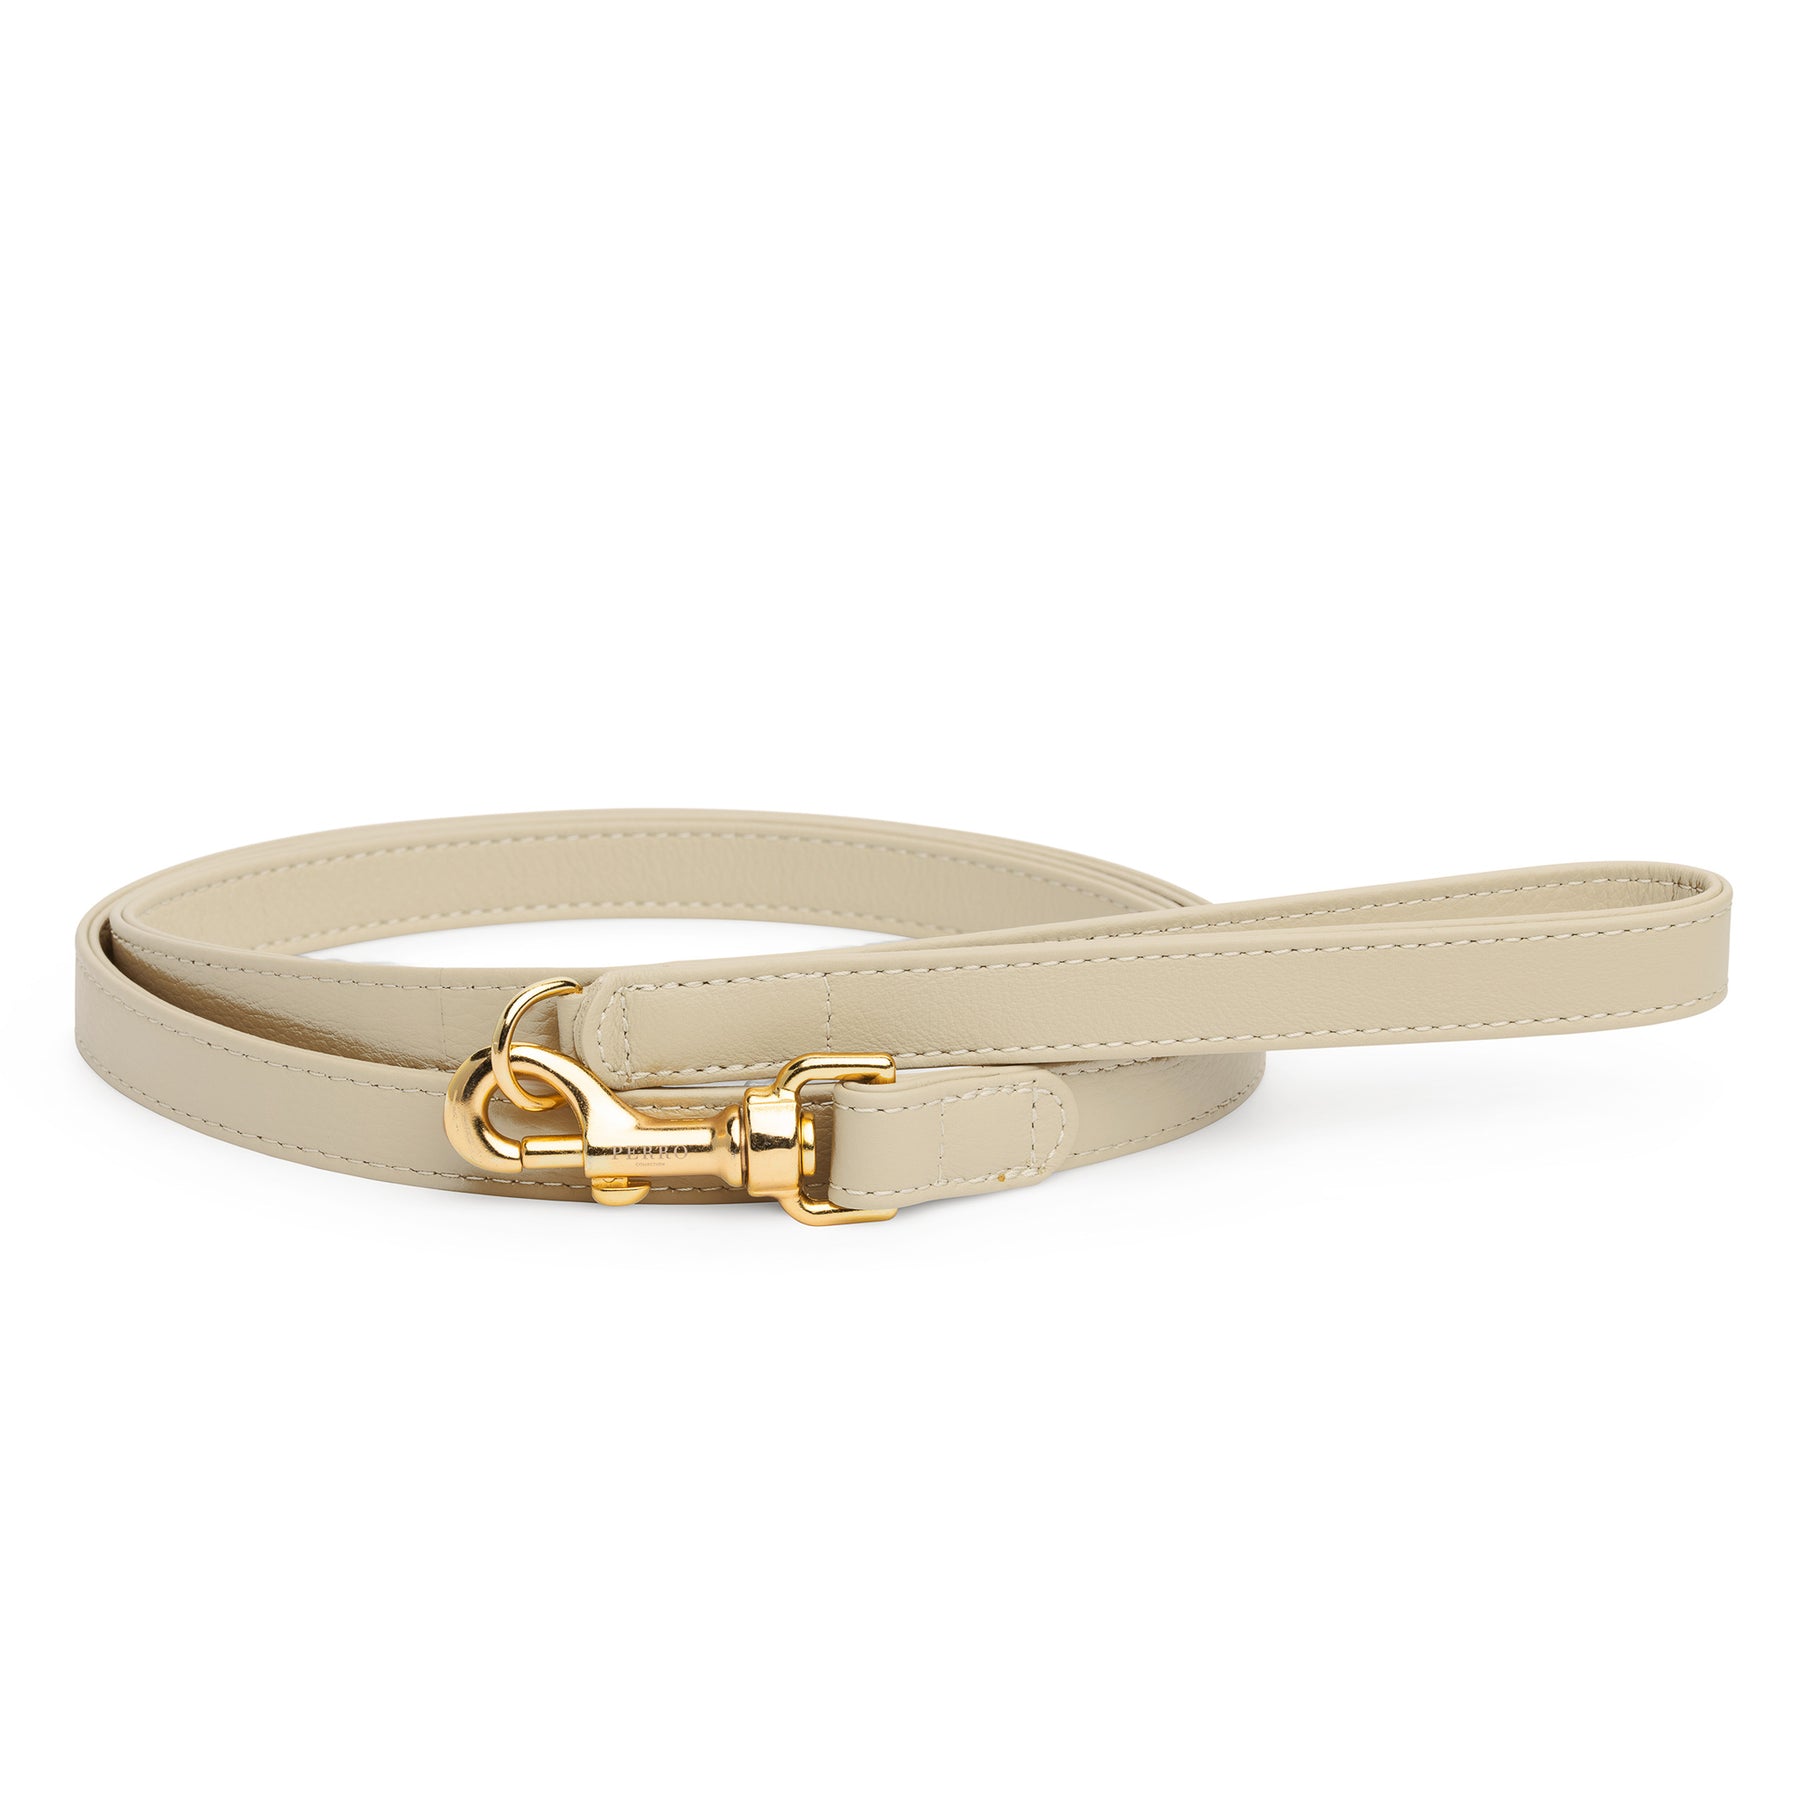 Pagerie The Tascher Leather Leash - Sand